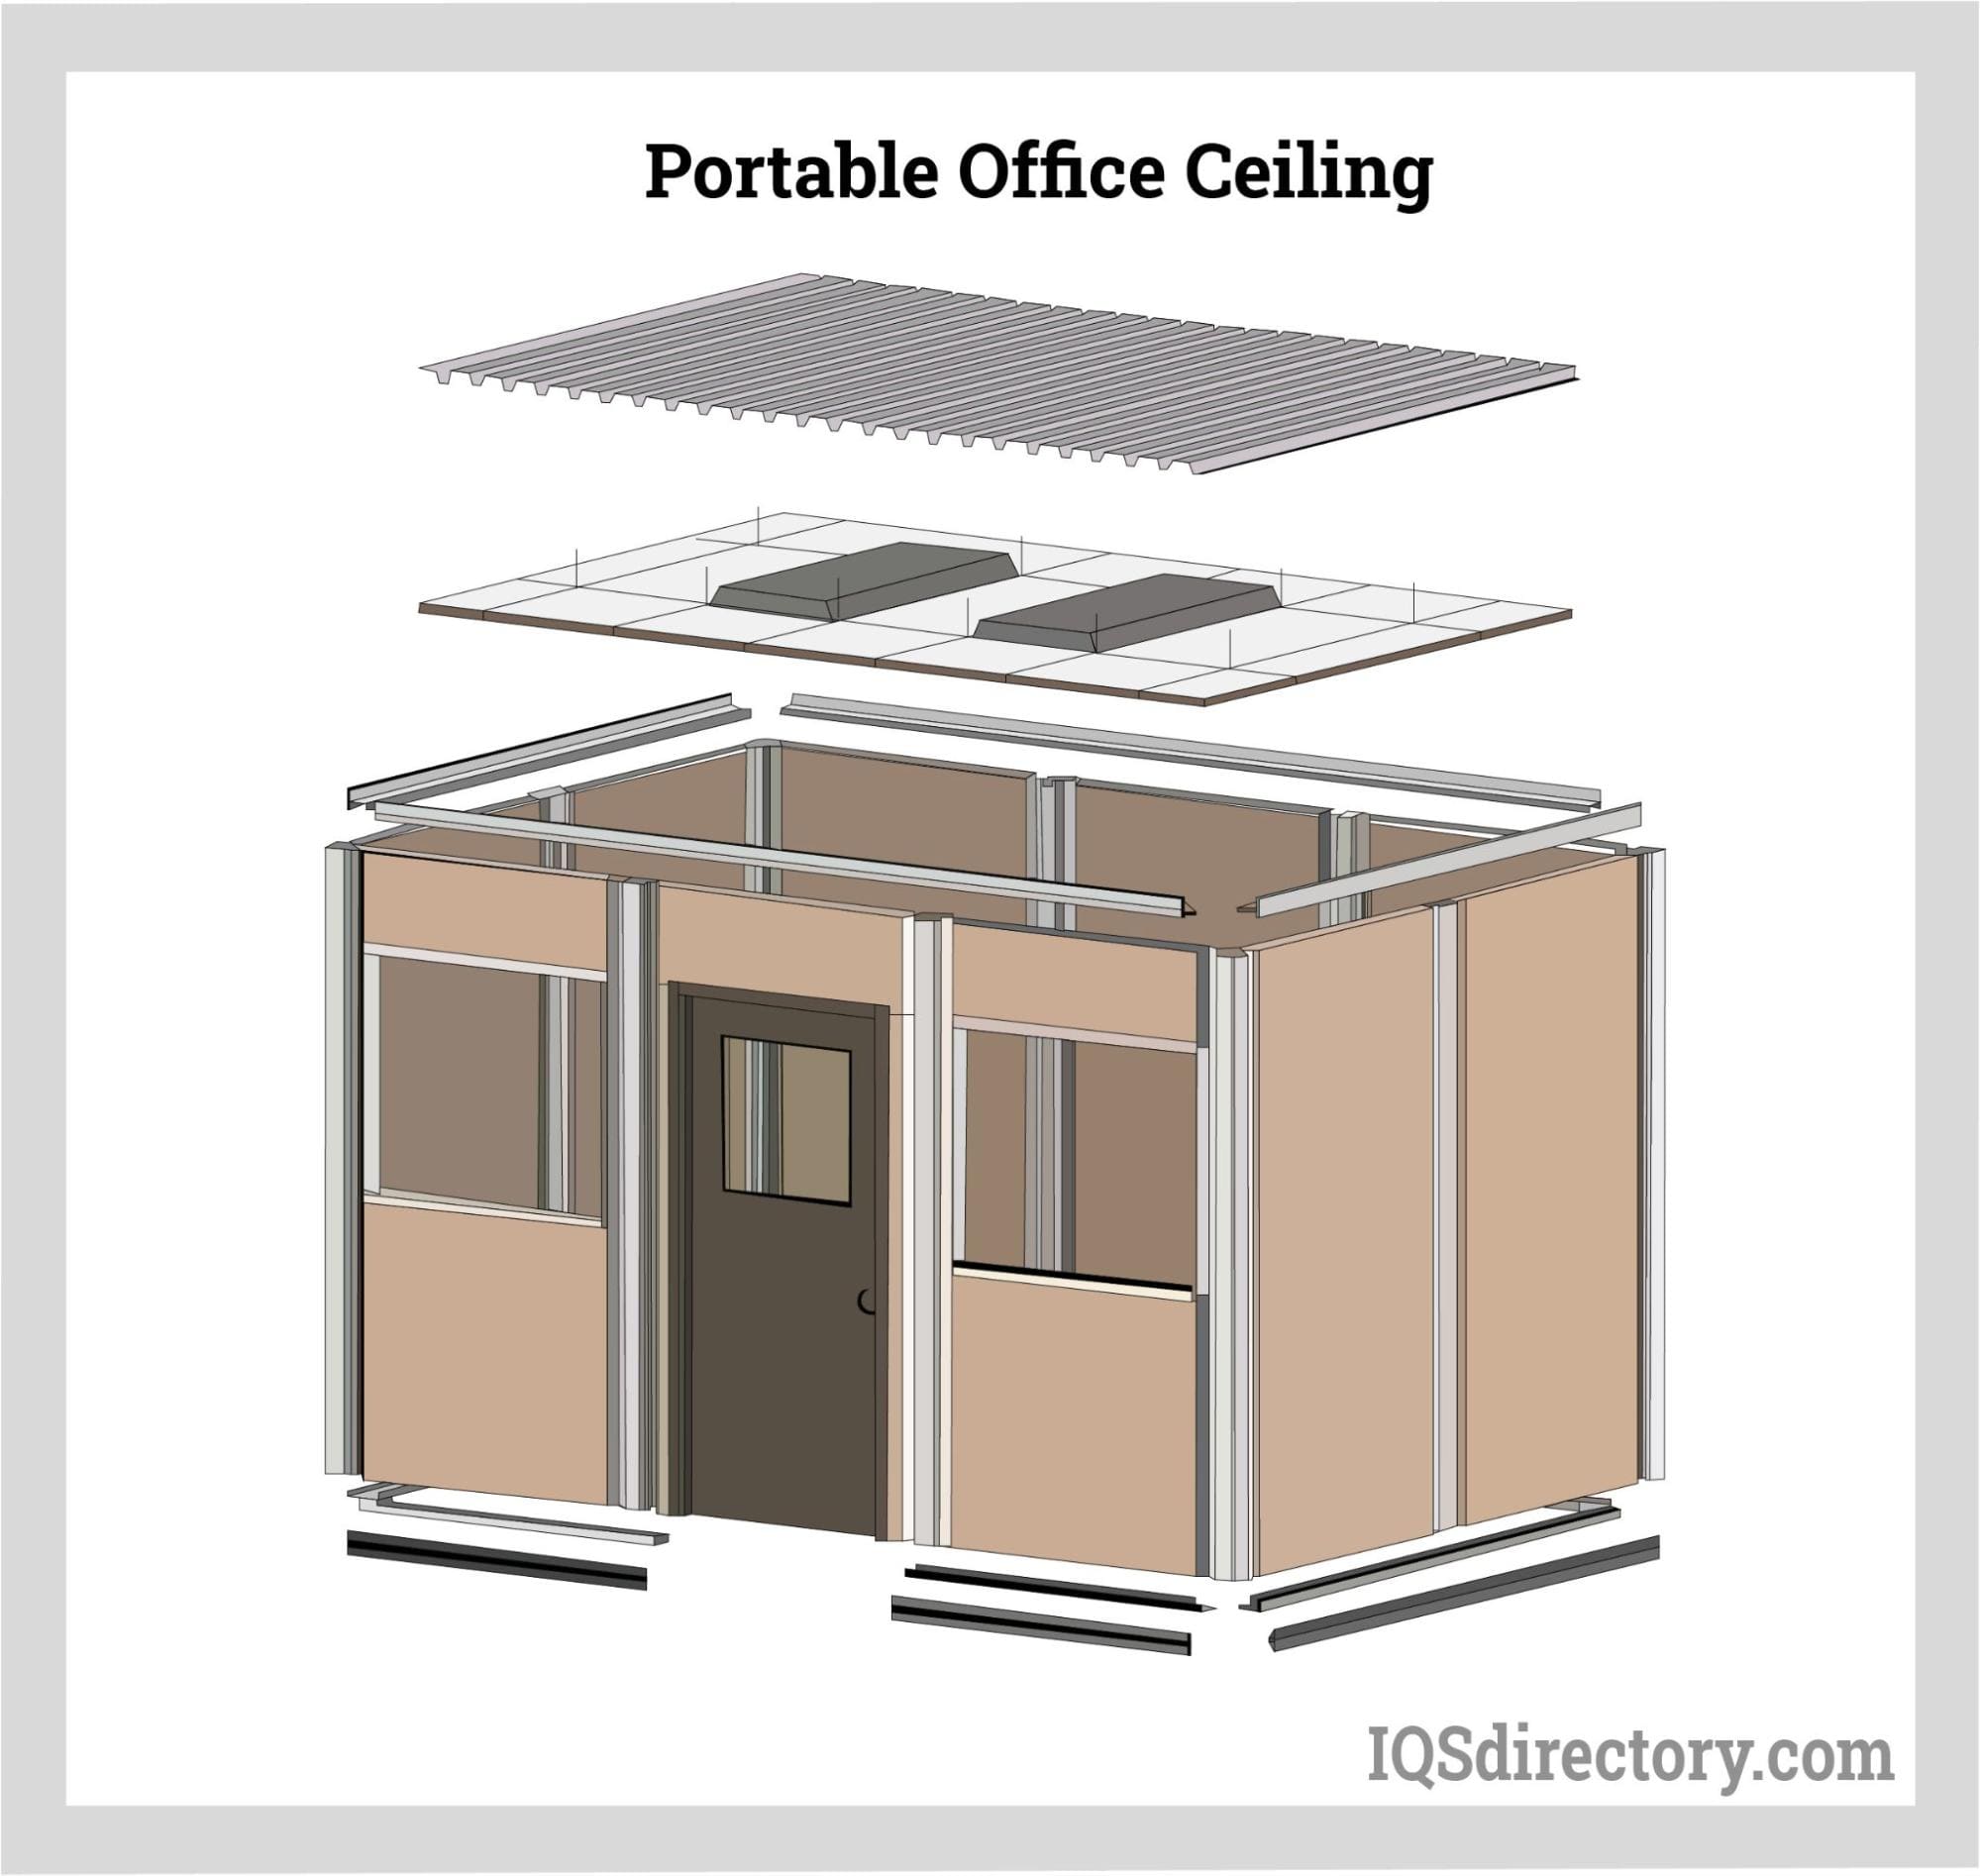 Portable Offices